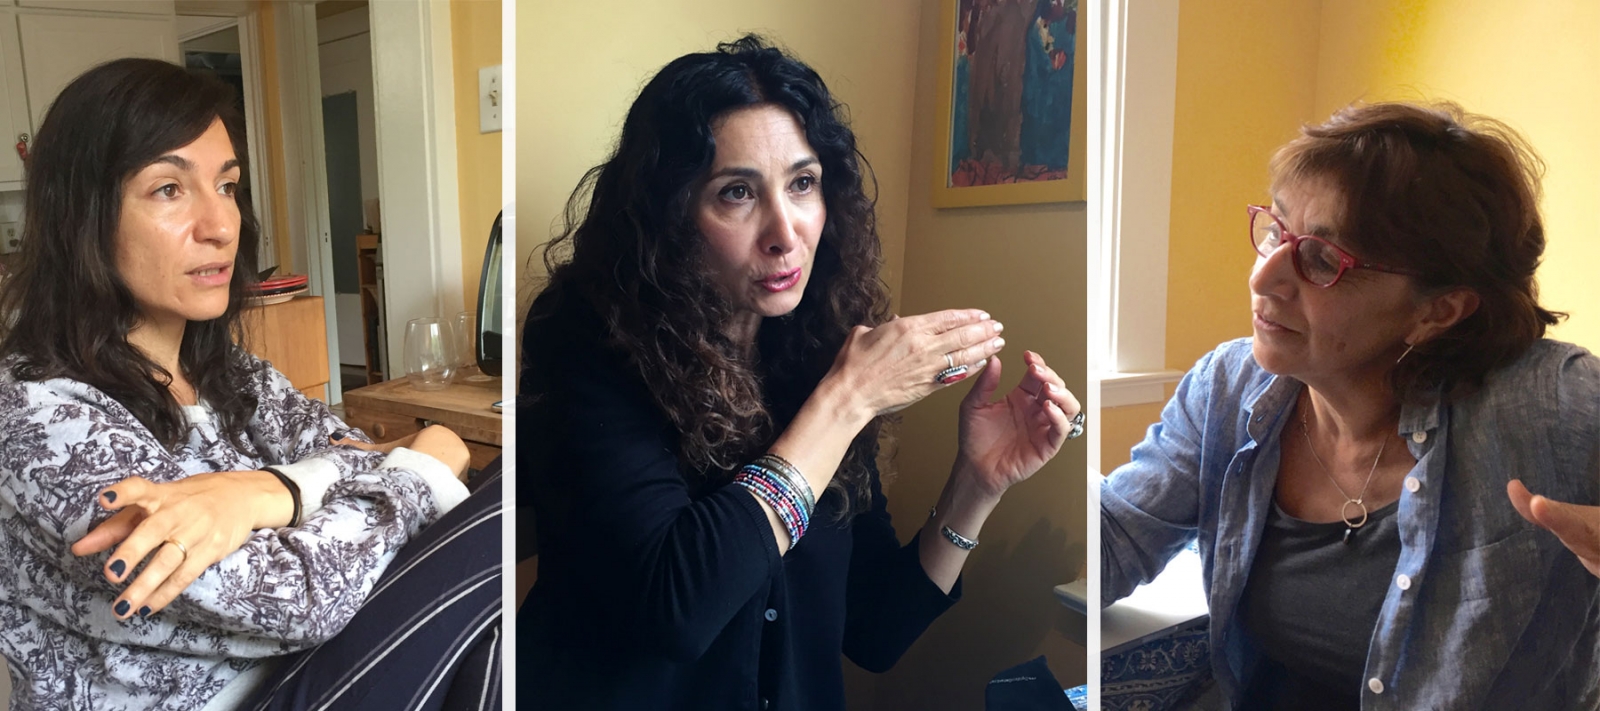 Left to Right: Laleh Khadivi, Sholeh Wolpé, and Persis Karim joined around Karim’s kitchen table to discuss the literature of Iranian Americans.